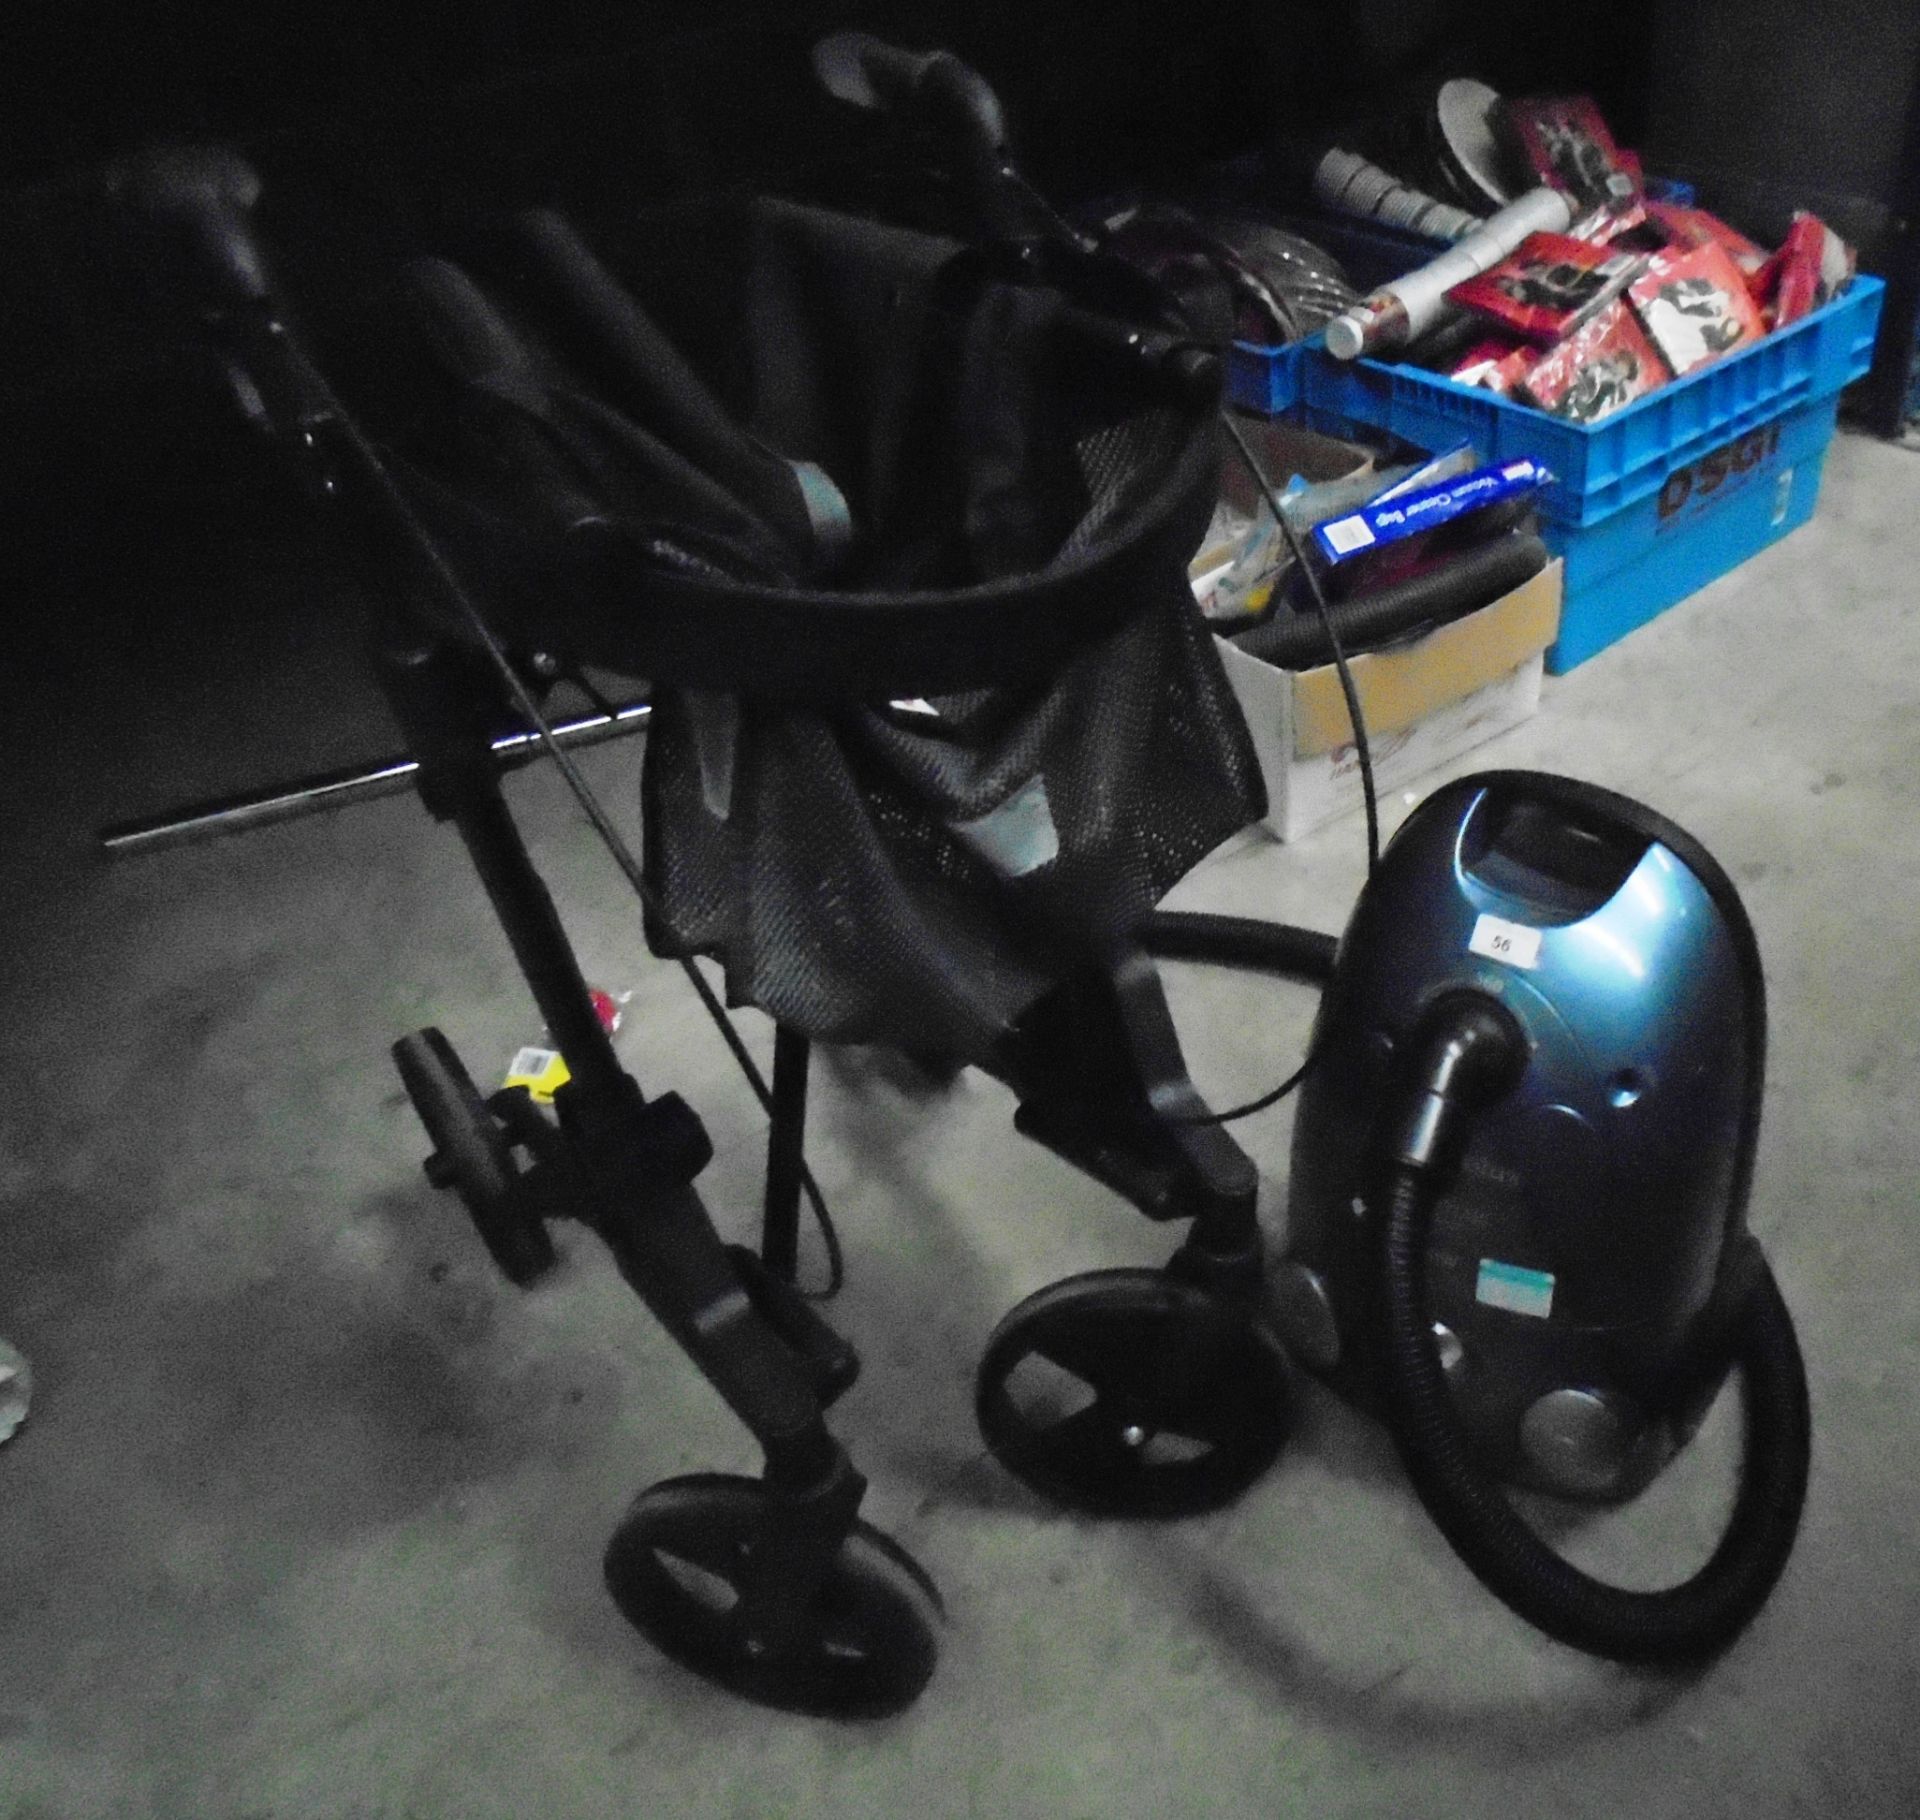 2 x items Electrolux 1900w Power Plus vacuum cleaner and a folding four wheeler mobility aid walker